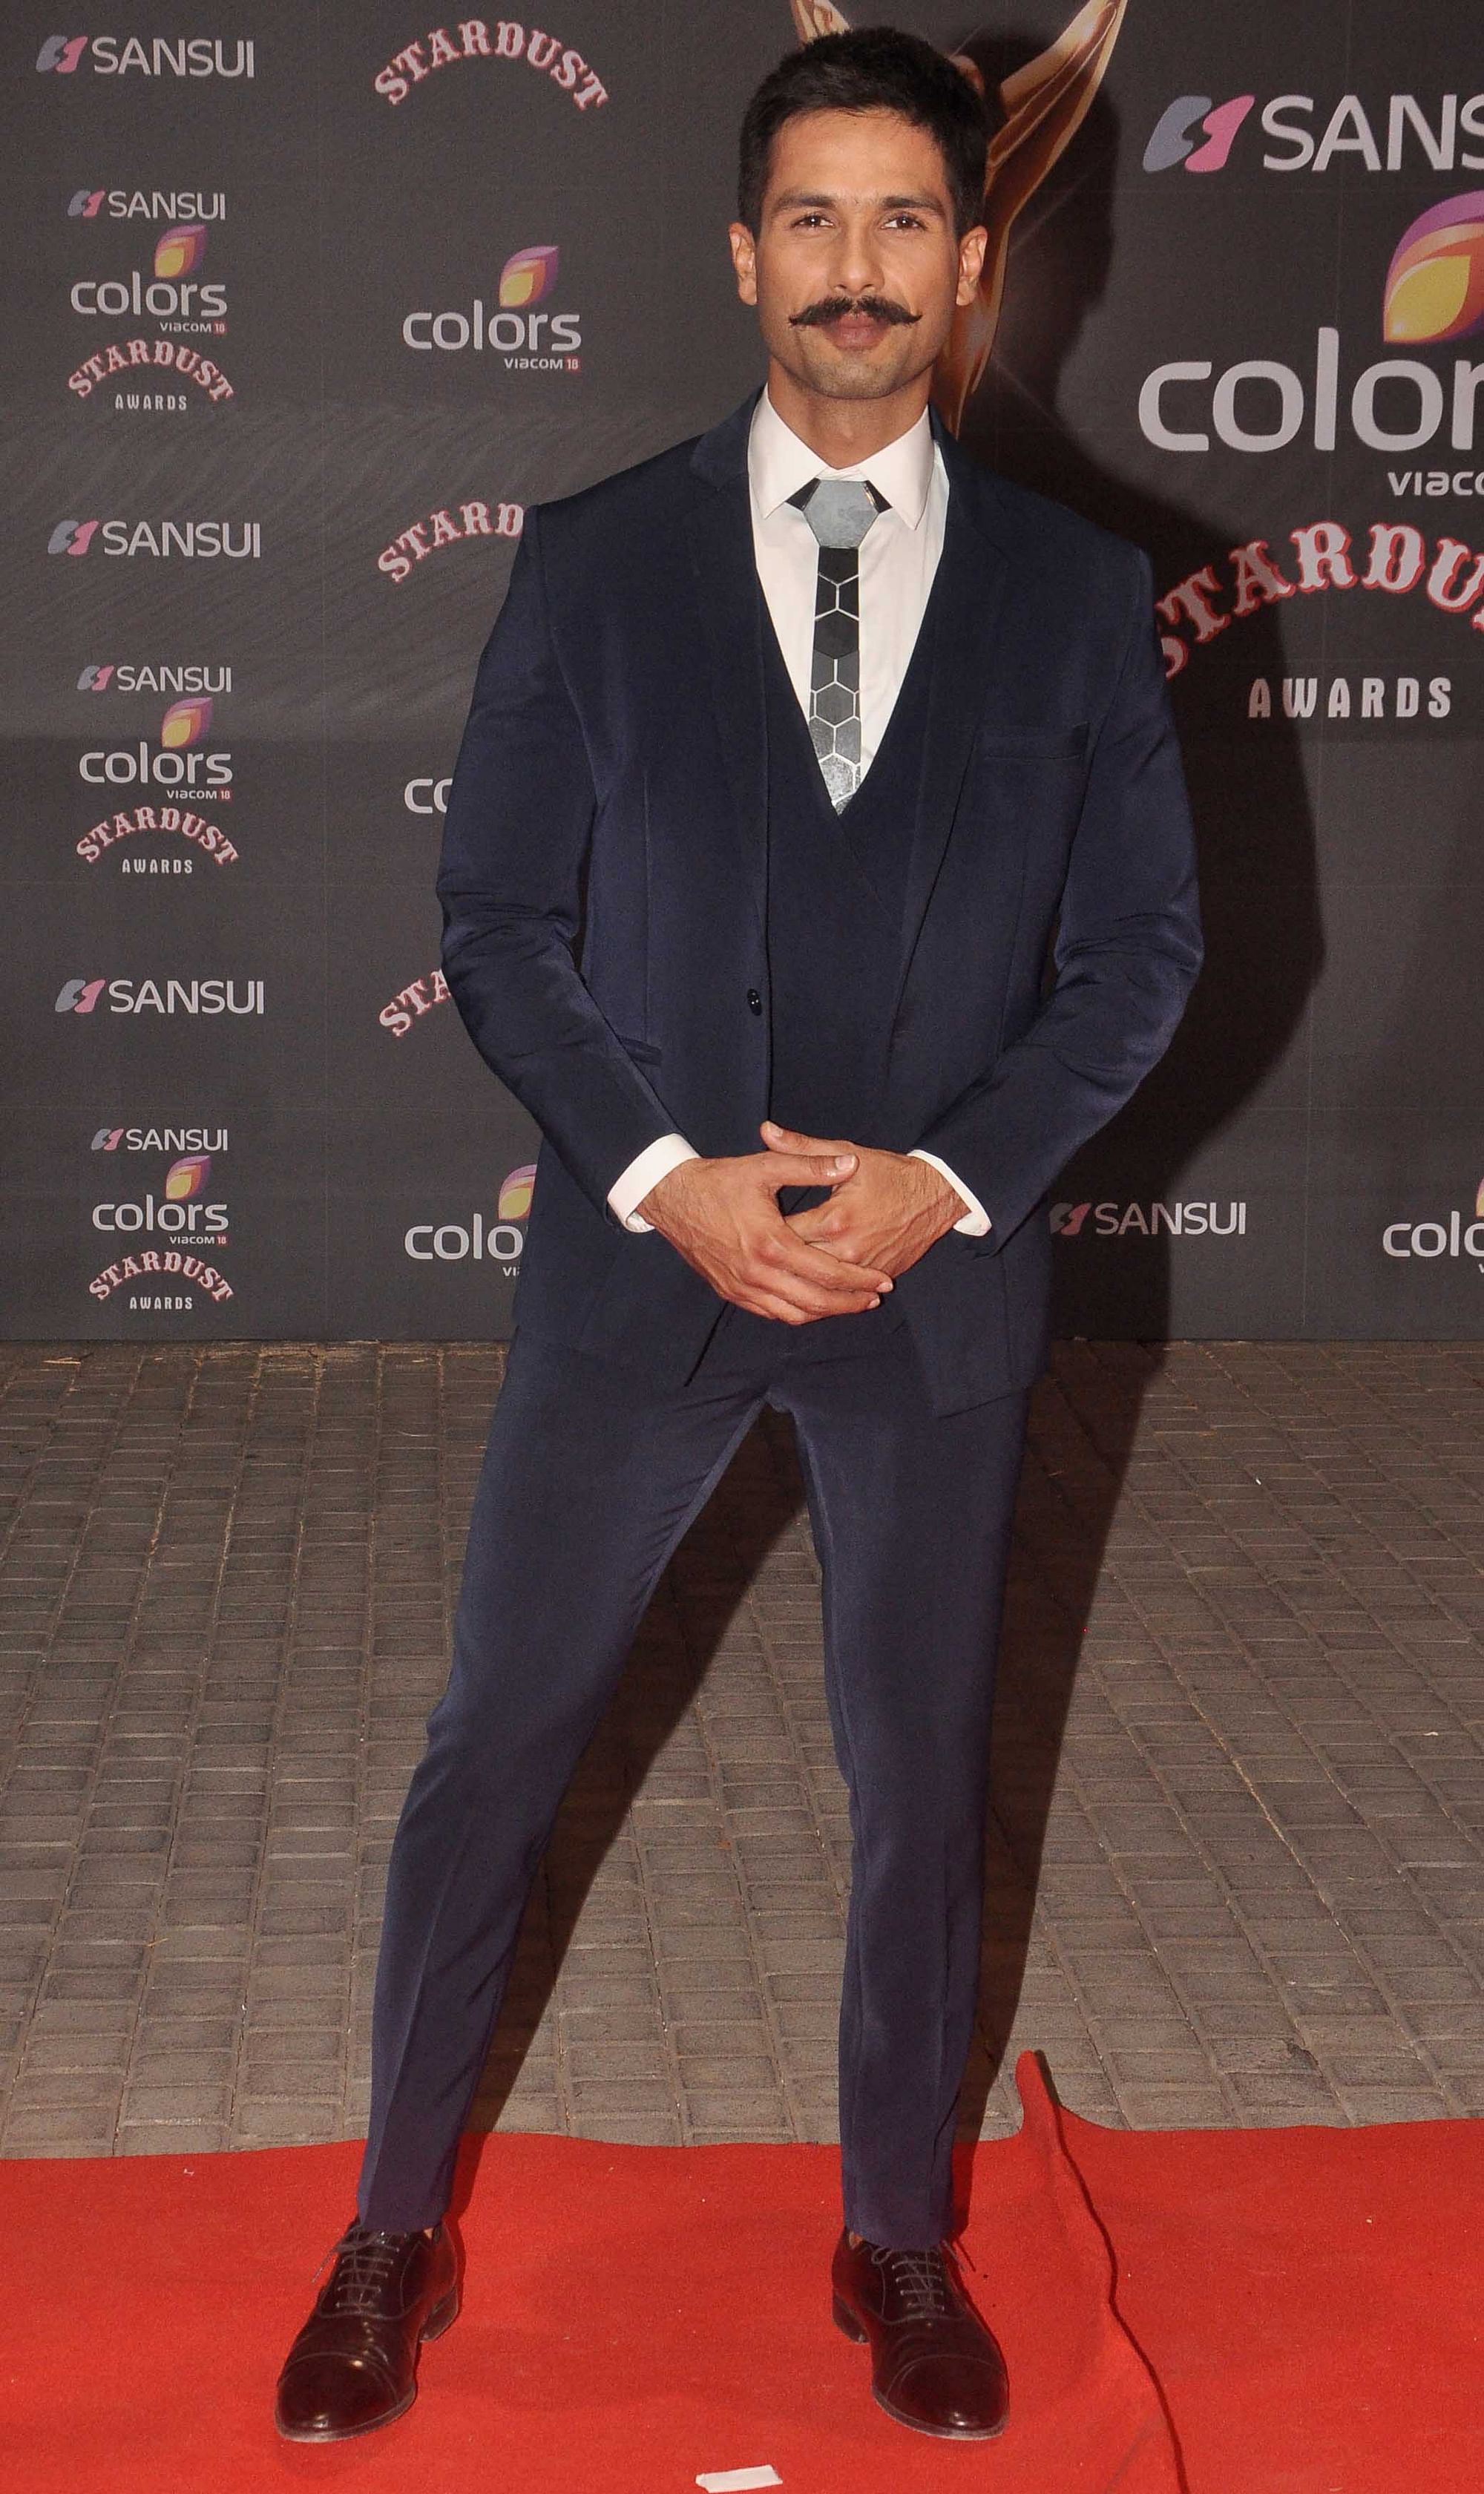 Stardust Awards 2015: Bollywood’s Red Carpet Stunners and Bummers